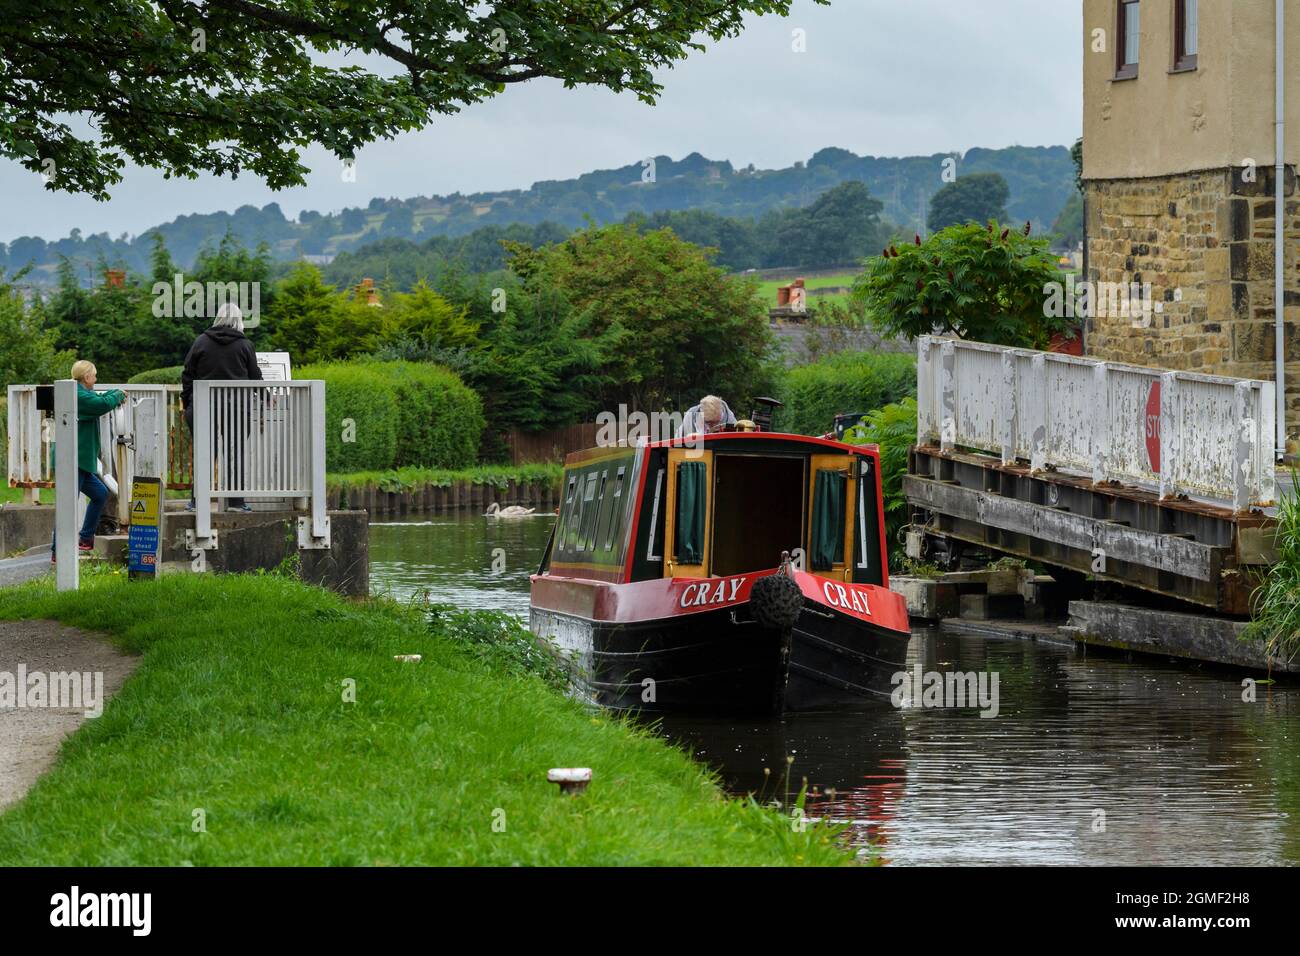 People watch hire narrowboat travelling past & through Micklethwaite swingbridge, manual barriers open - Leeds Liverpool Canal, Yorkshire, England UK. Stock Photo